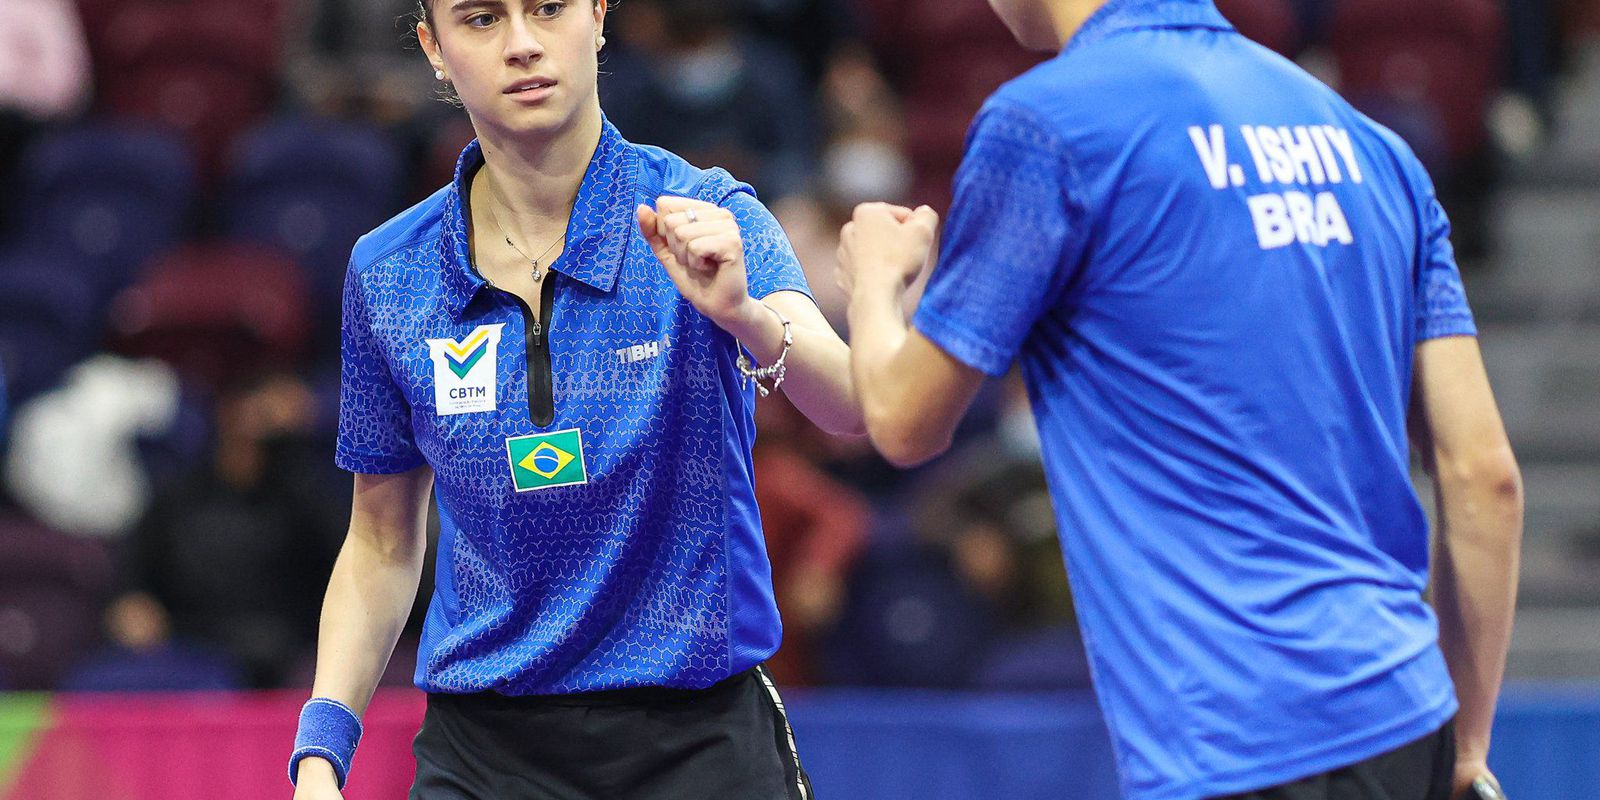 Double Takahashi and Ishiy win gold at table tennis Pan American